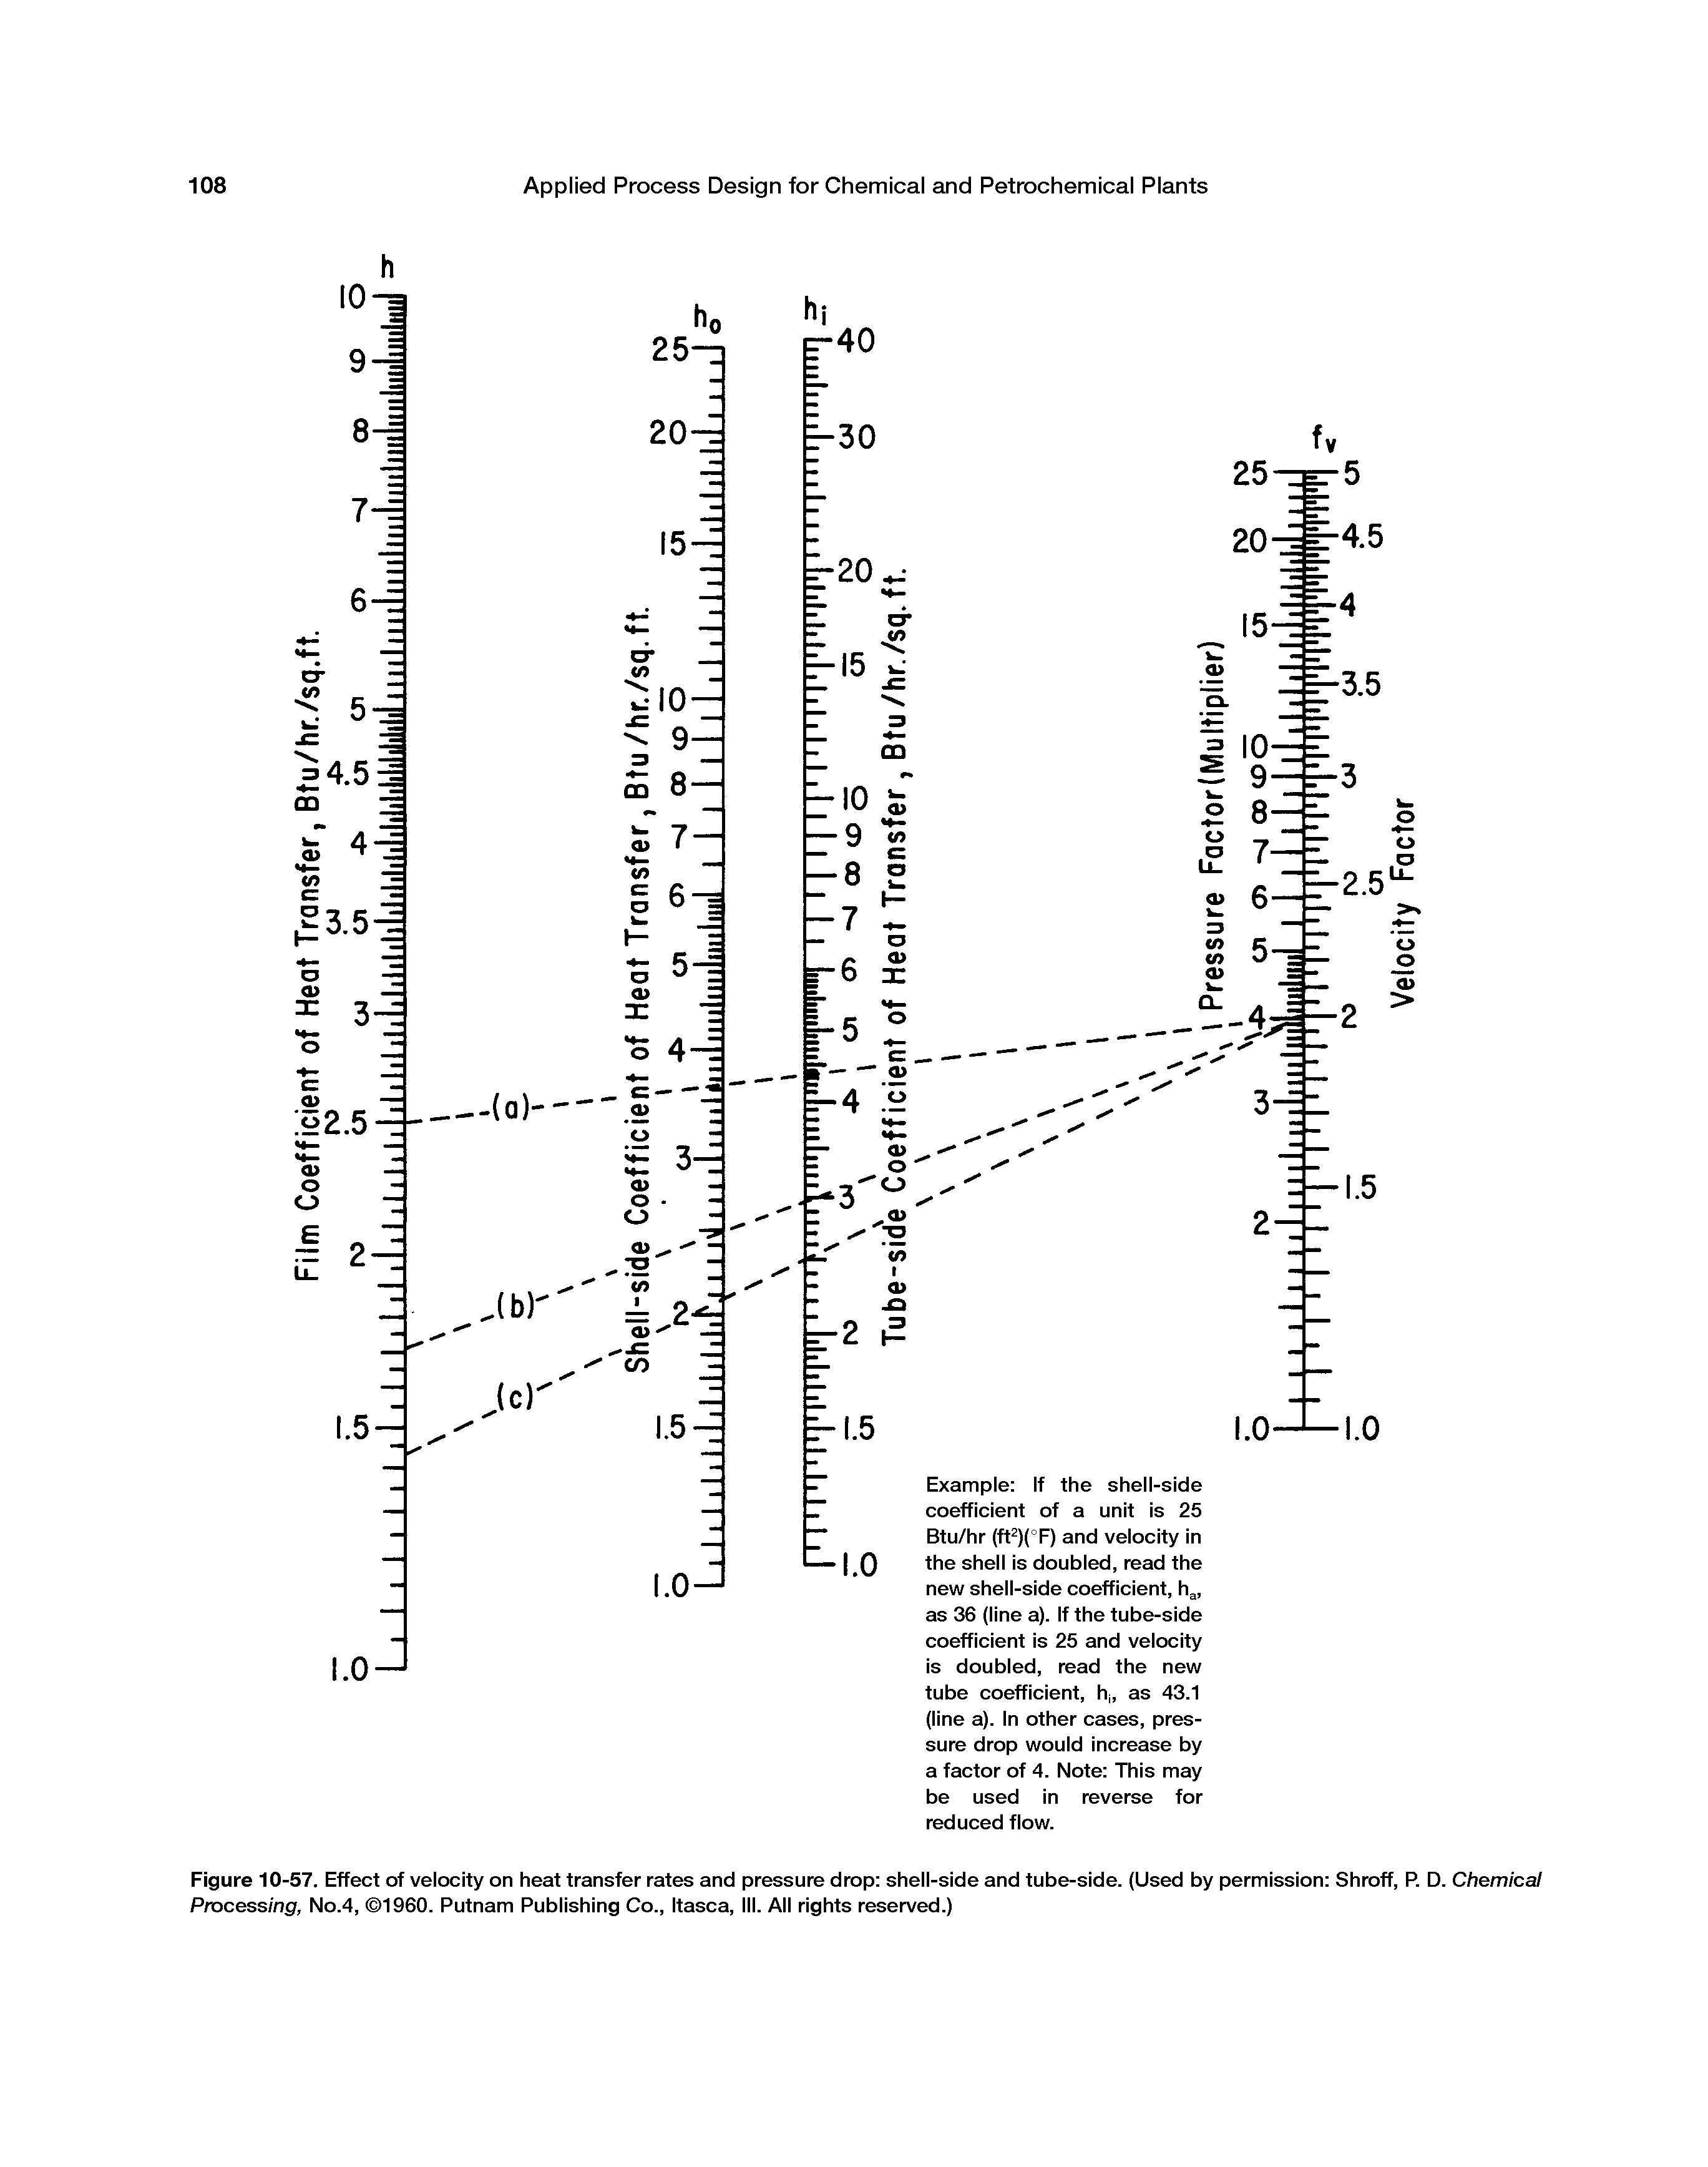 Figure 10-57. Effect of velocity on heat transfer rates and pressure drop shell-side and tube-side. (Used by permission Shroff, P. D. Chemical Processing, No.4, 1960. Putnam Publishing Co., Itasca, III. All rights reserved.)...